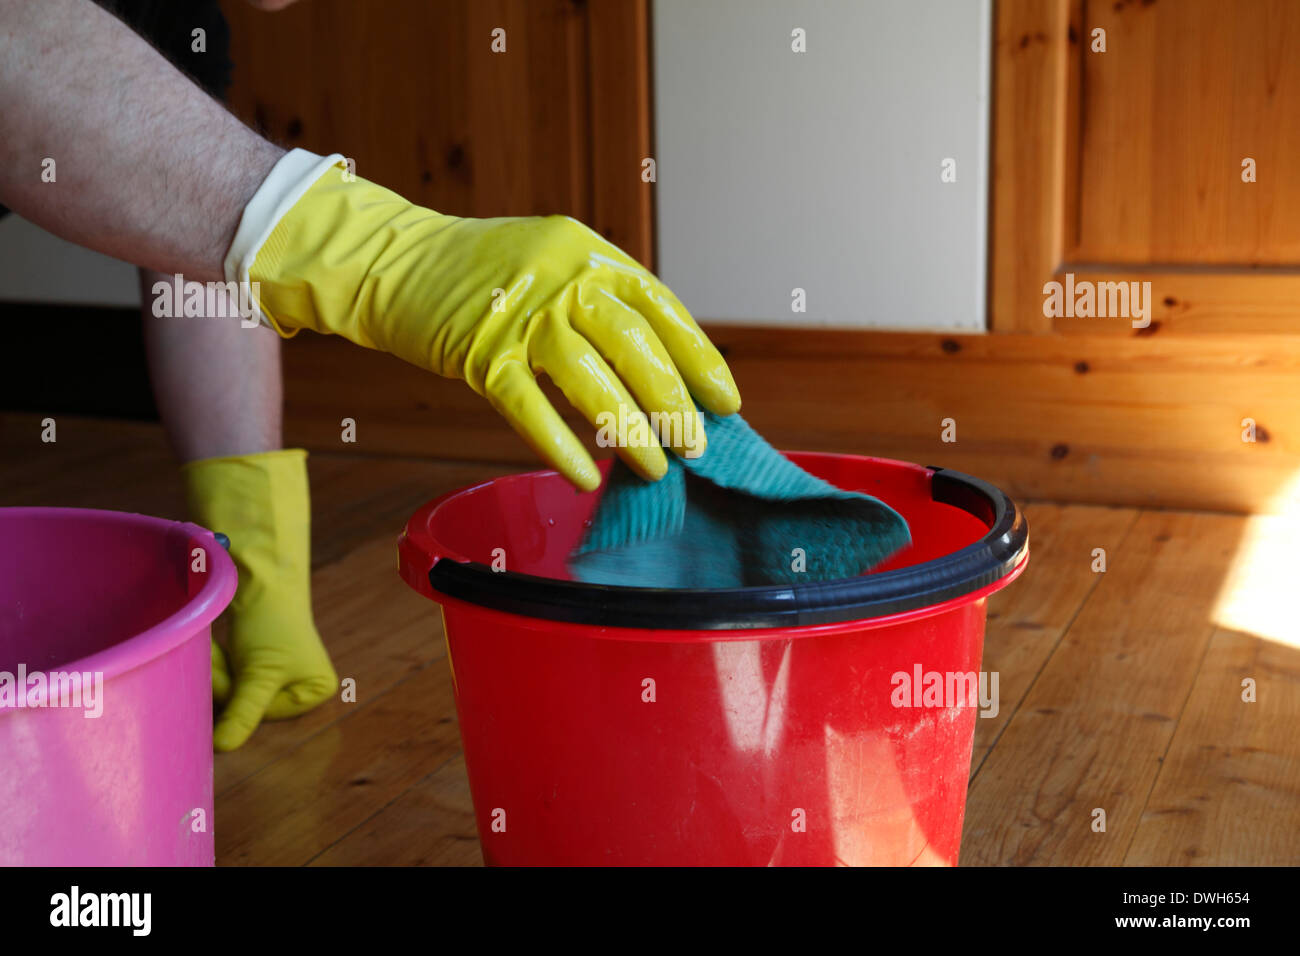 A man is scrubbing a wooden floor. Stock Photo